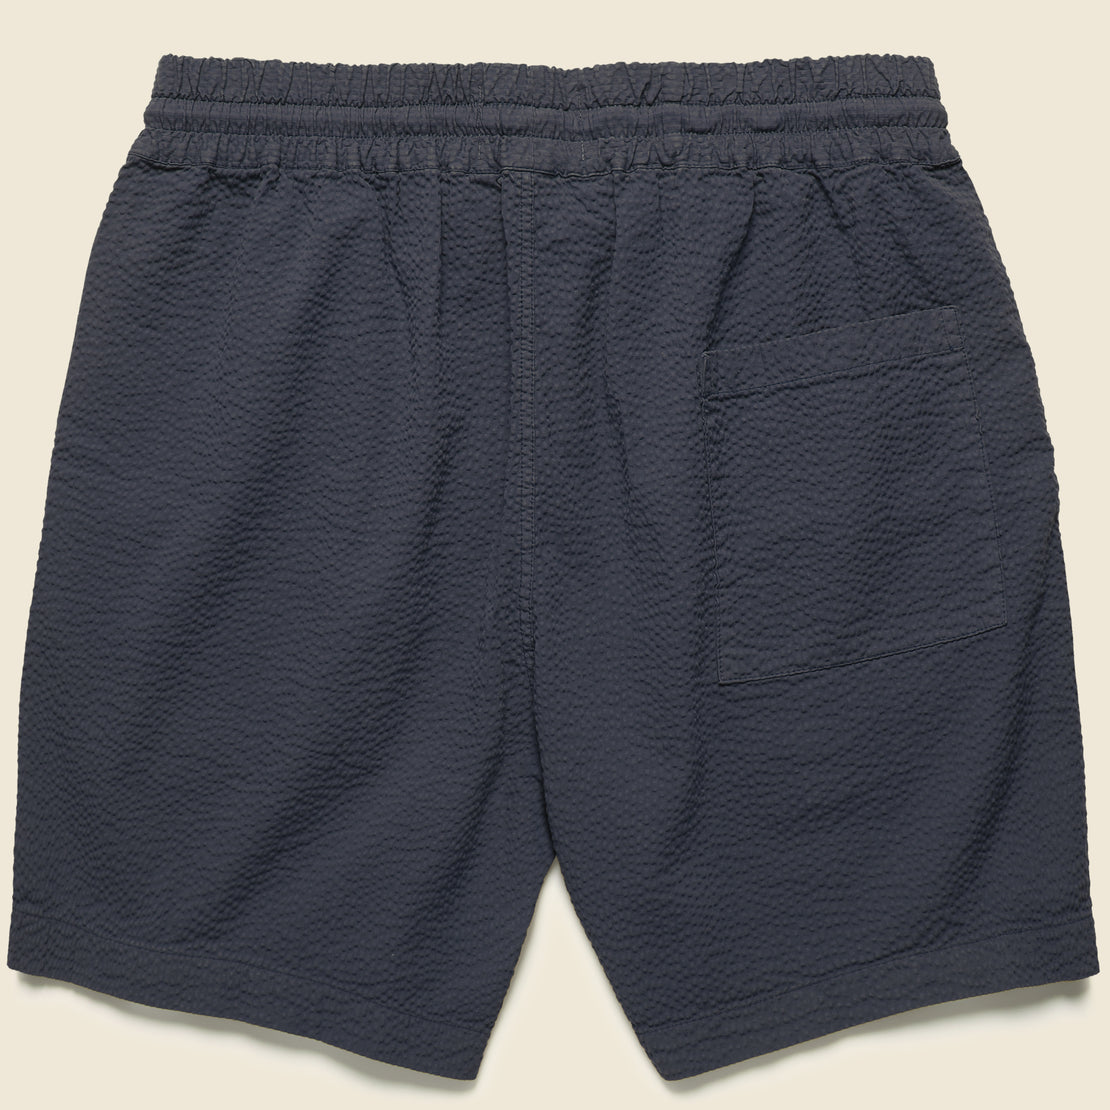 Atlantico Seersucker Shorts - Navy - Portuguese Flannel - STAG Provisions - Shorts - Lounge